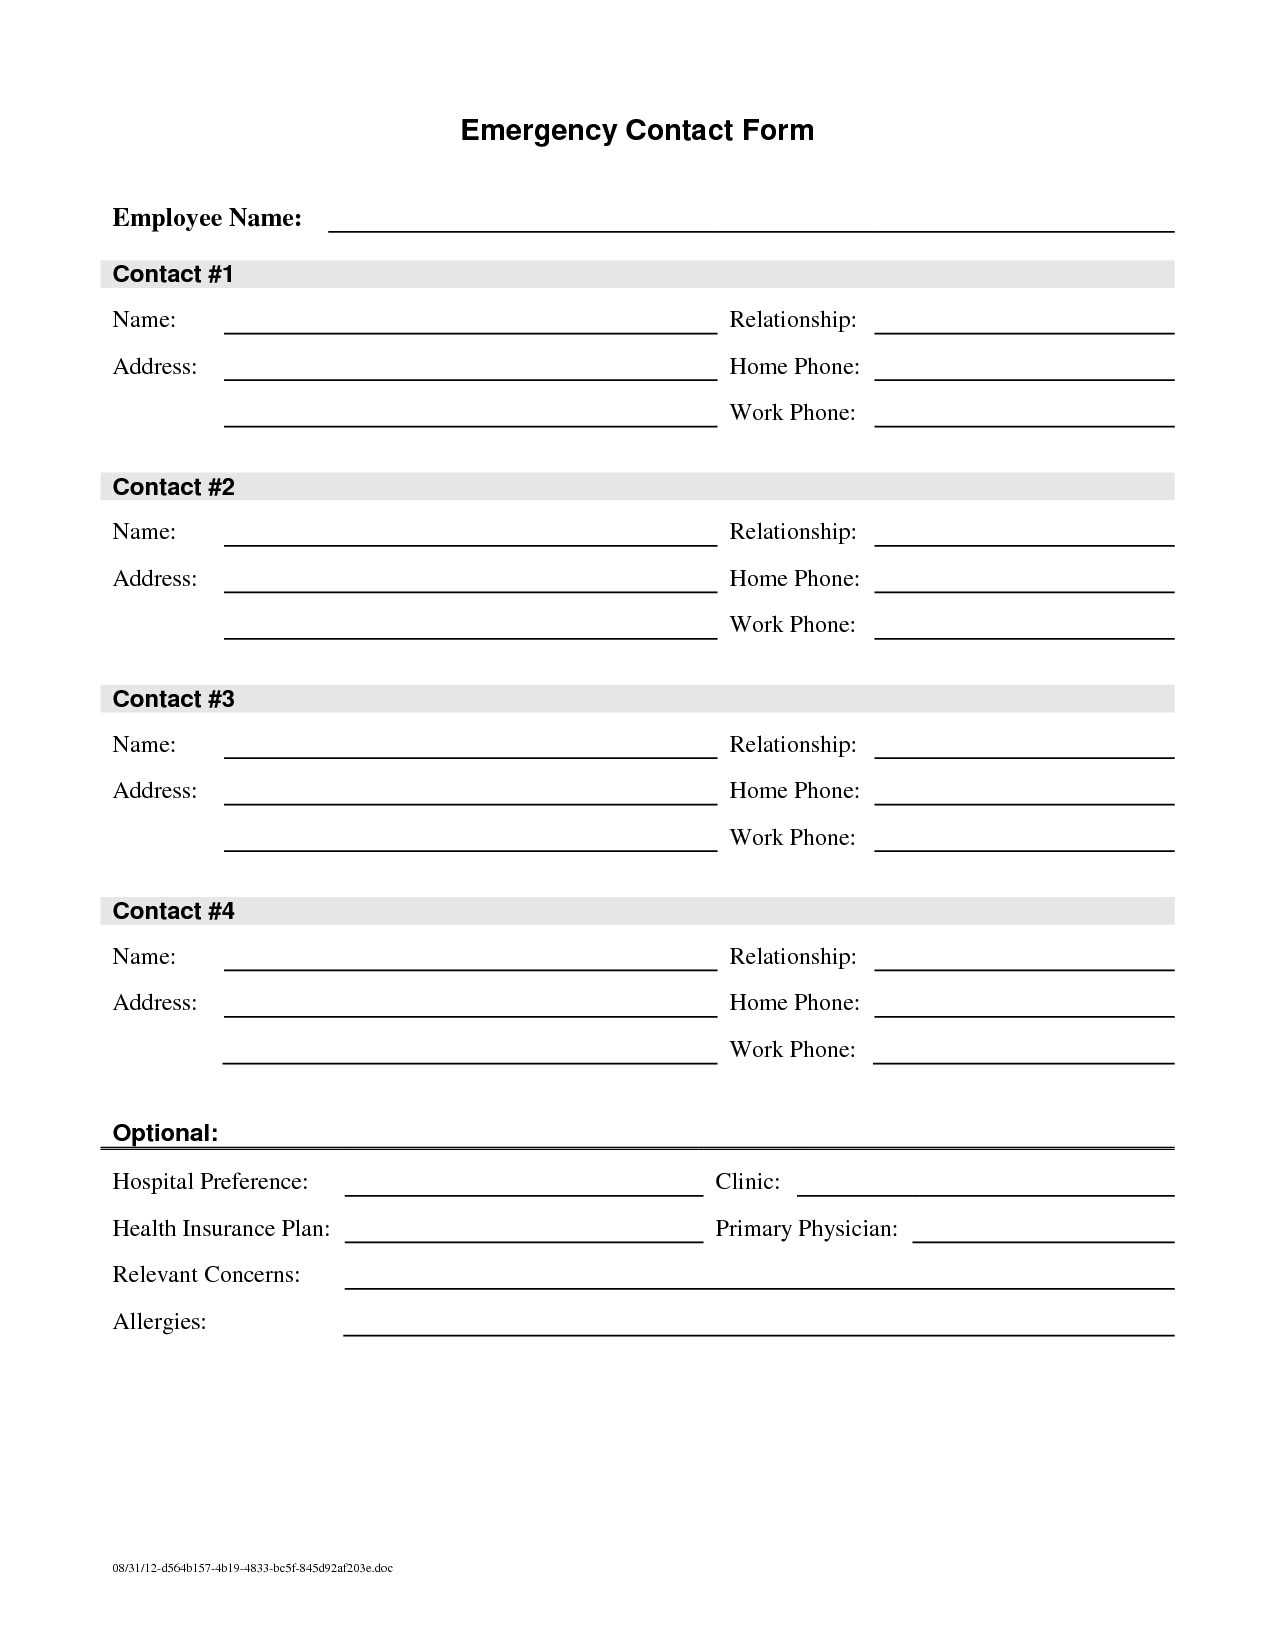 printable-employee-emergency-contact-form-template-printable-templates